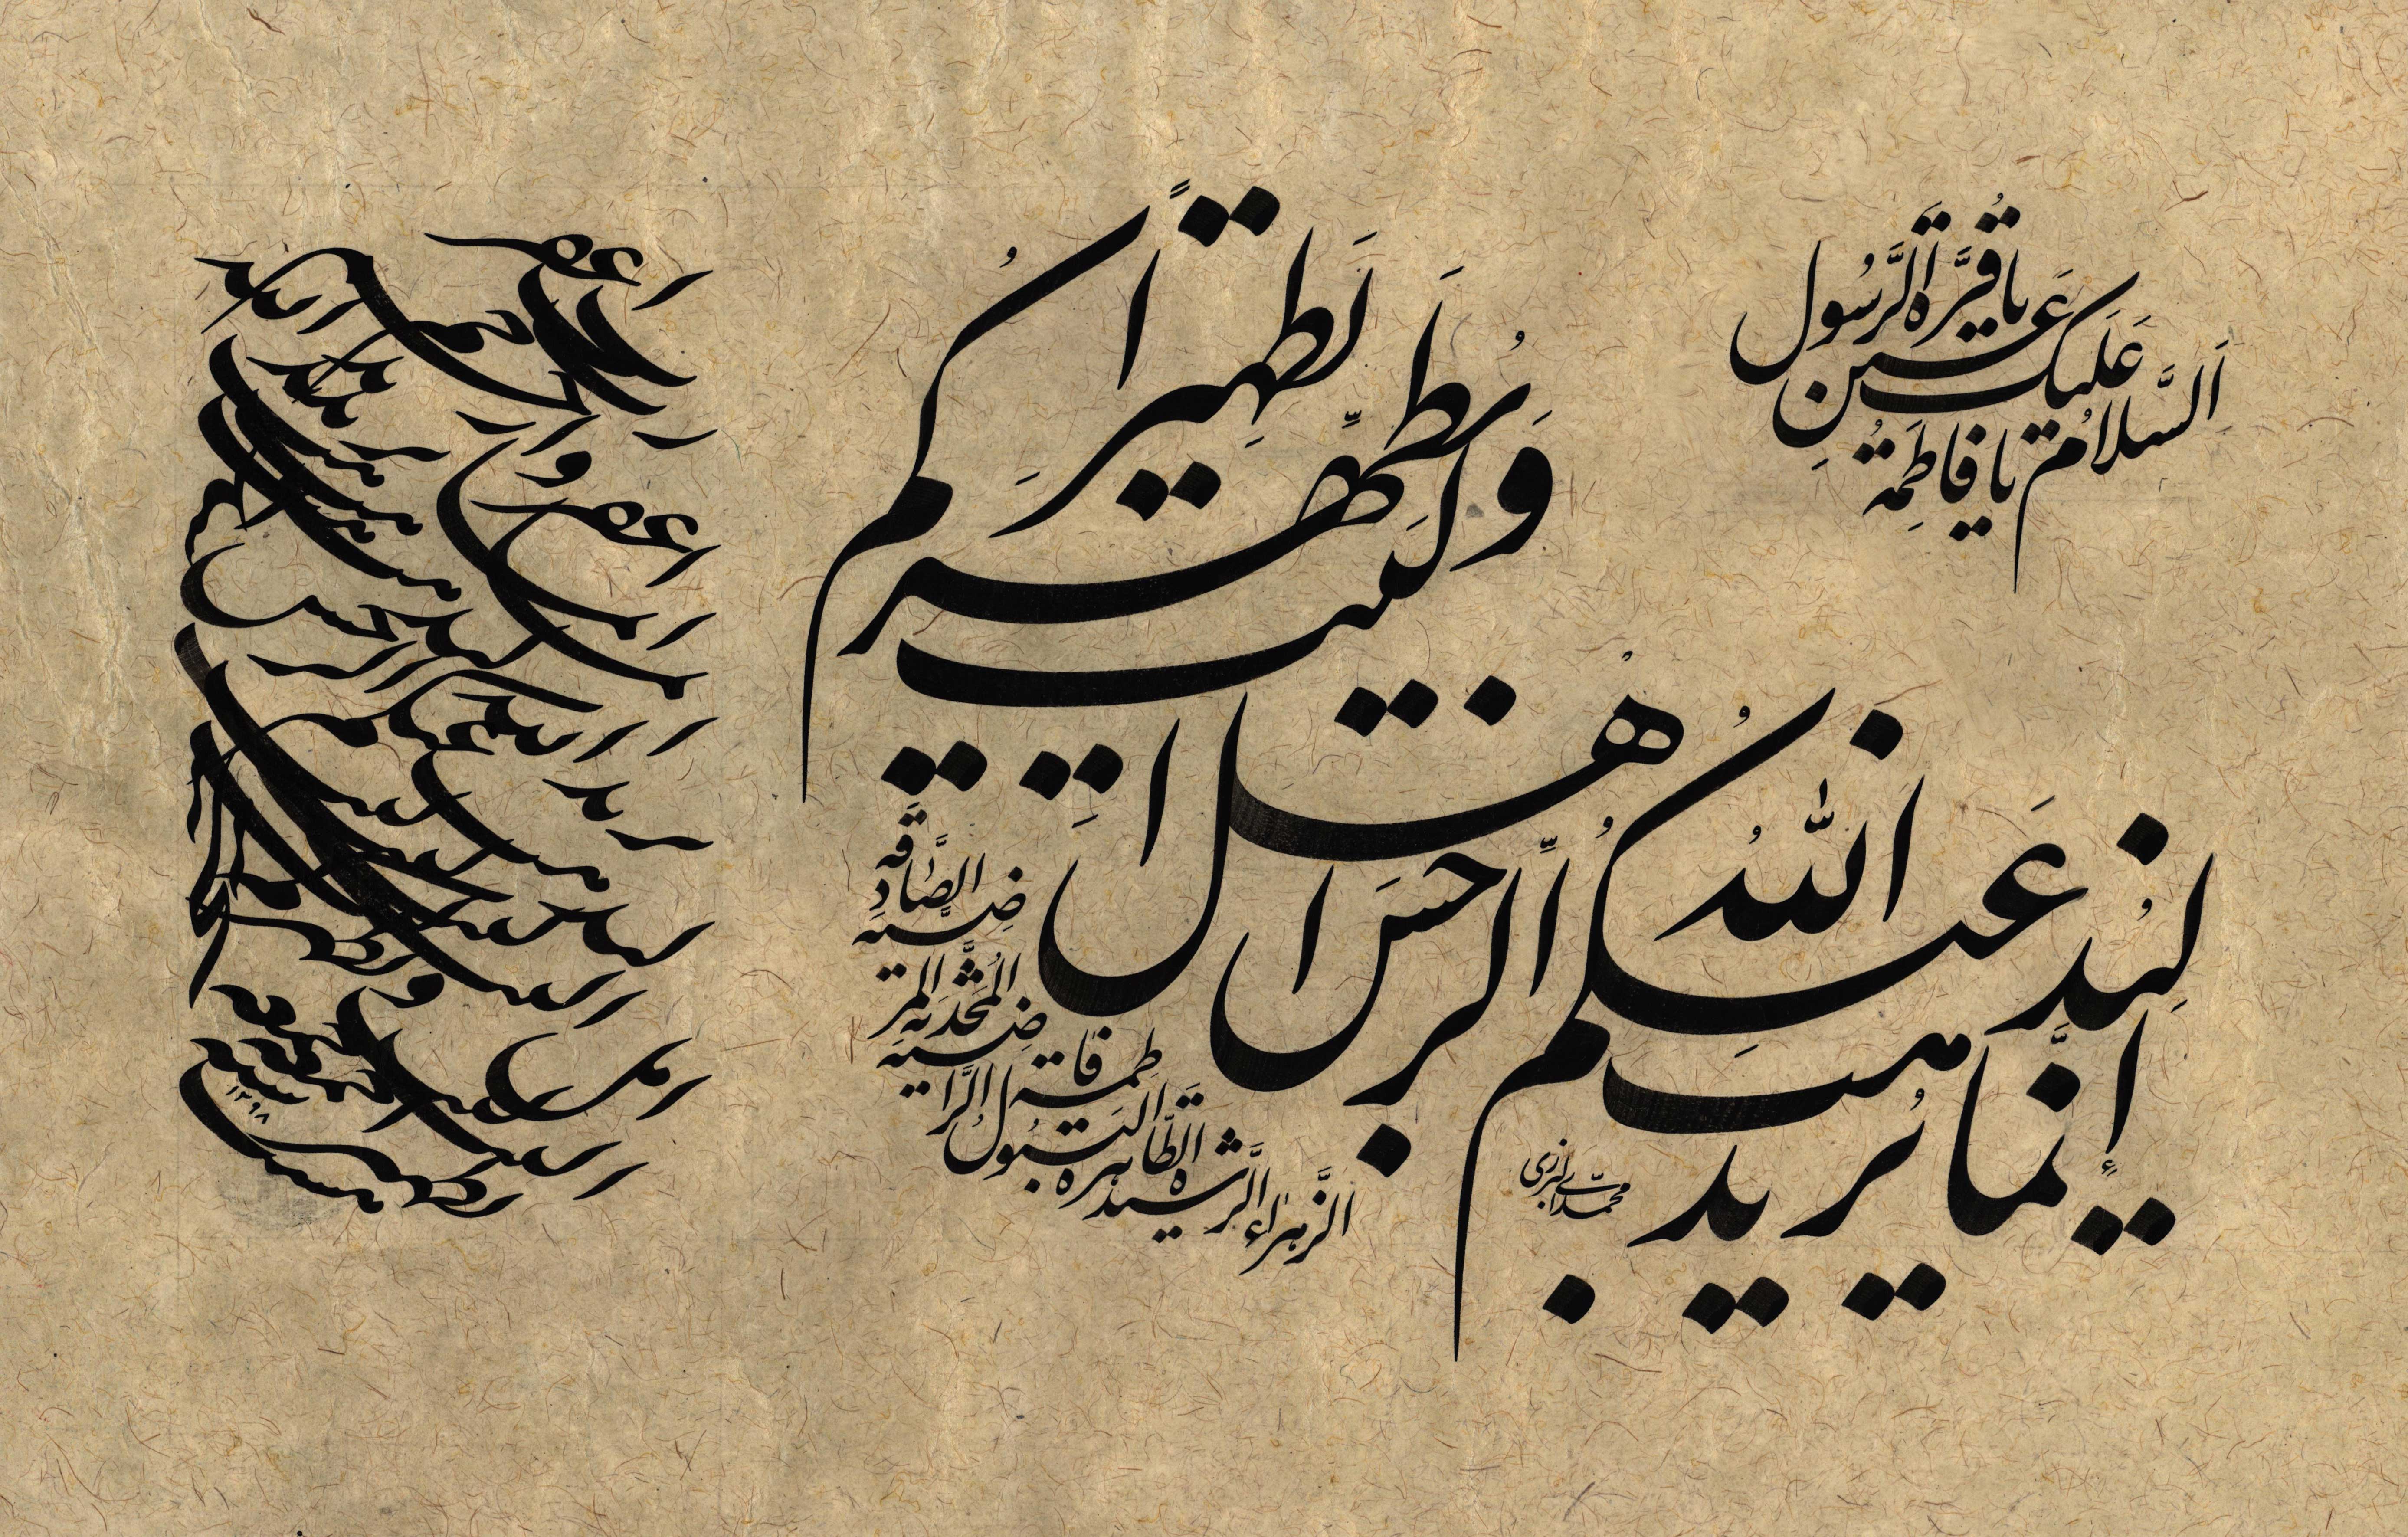 The winners of the encouraging award in the brief-text section written in Nastaliq font